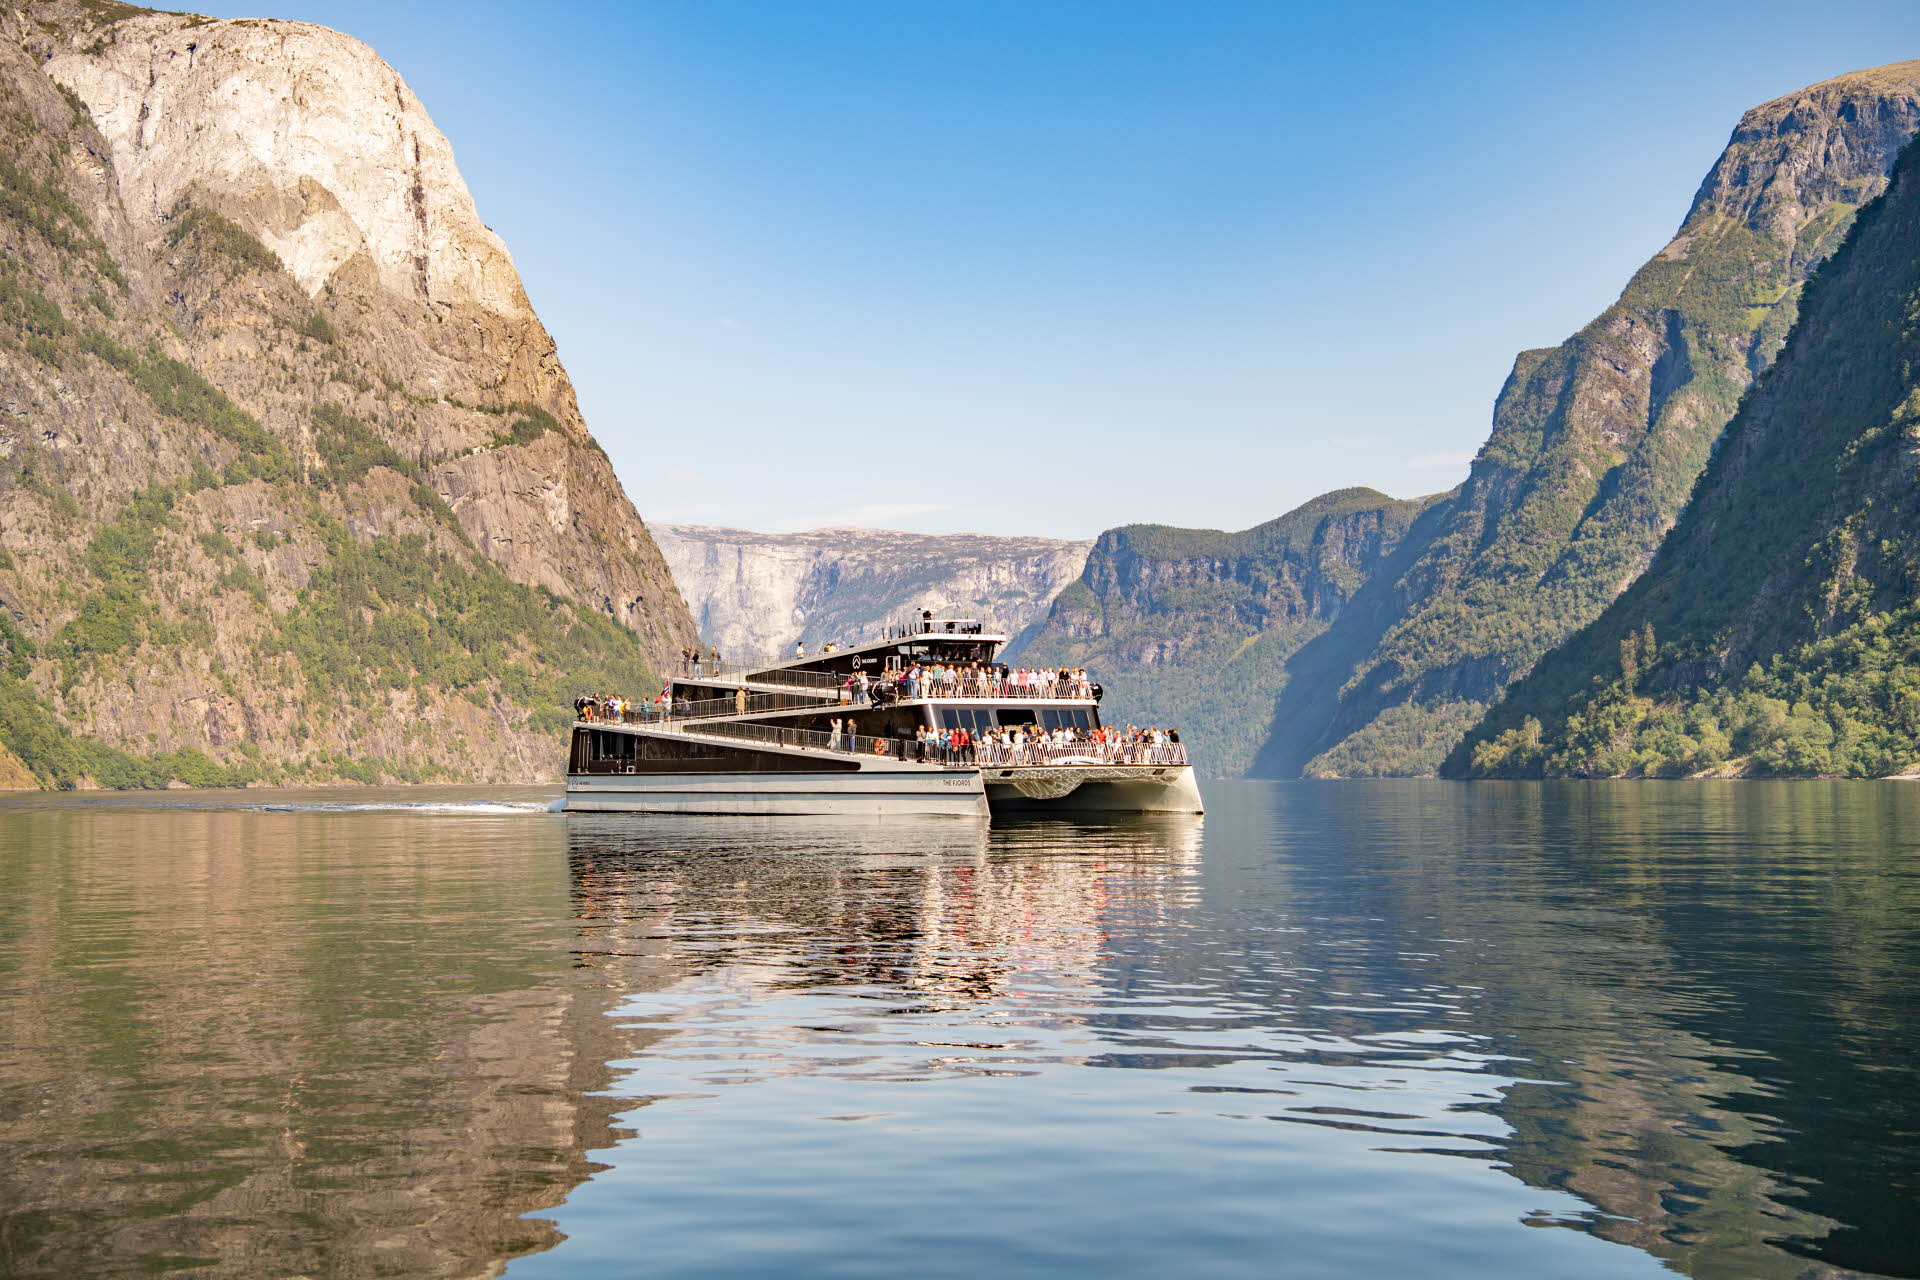 M/S Future of The Fjords on the Nærøyfjord with steep mountains on either side